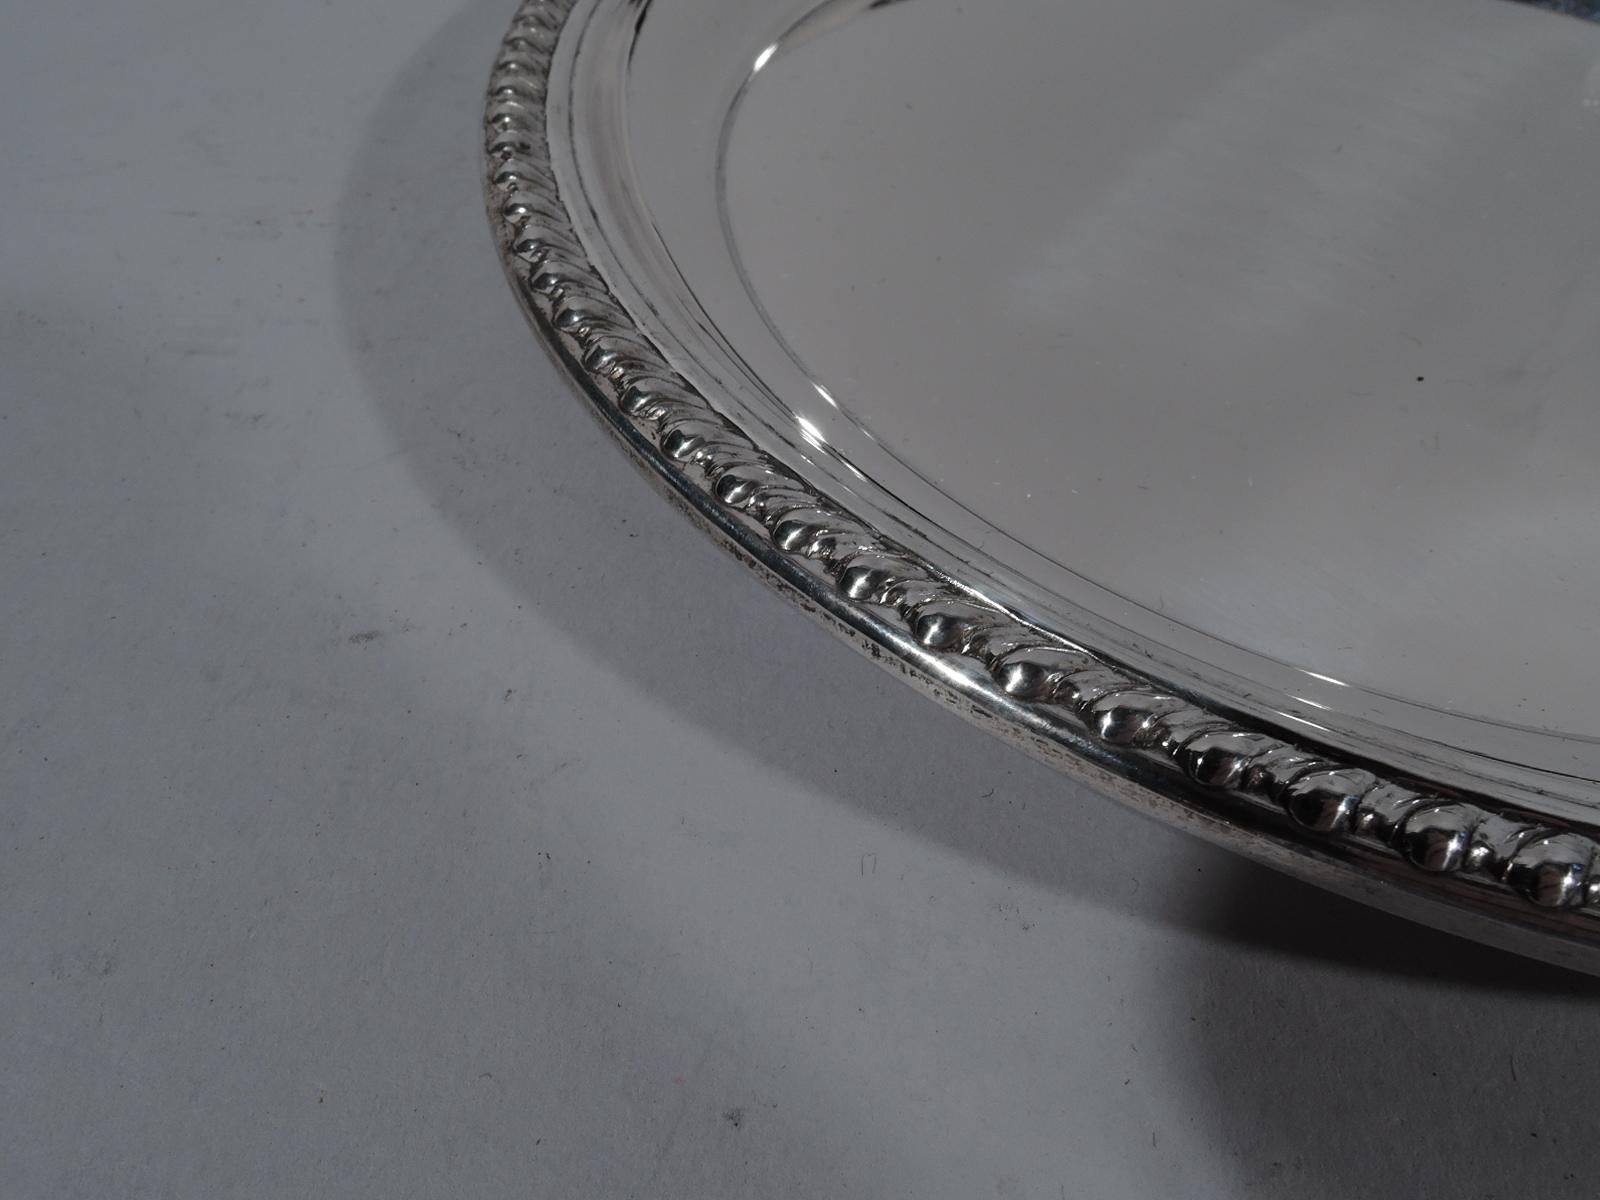 Georgian-style sterling silver tray. Retailed by Cartier in New York, circa 1950. Round with chased gadrooned rim. Traditional with nice heft. Marked “Cartier” and “Sterling”. Heavy weight: 9.5 troy ounces.